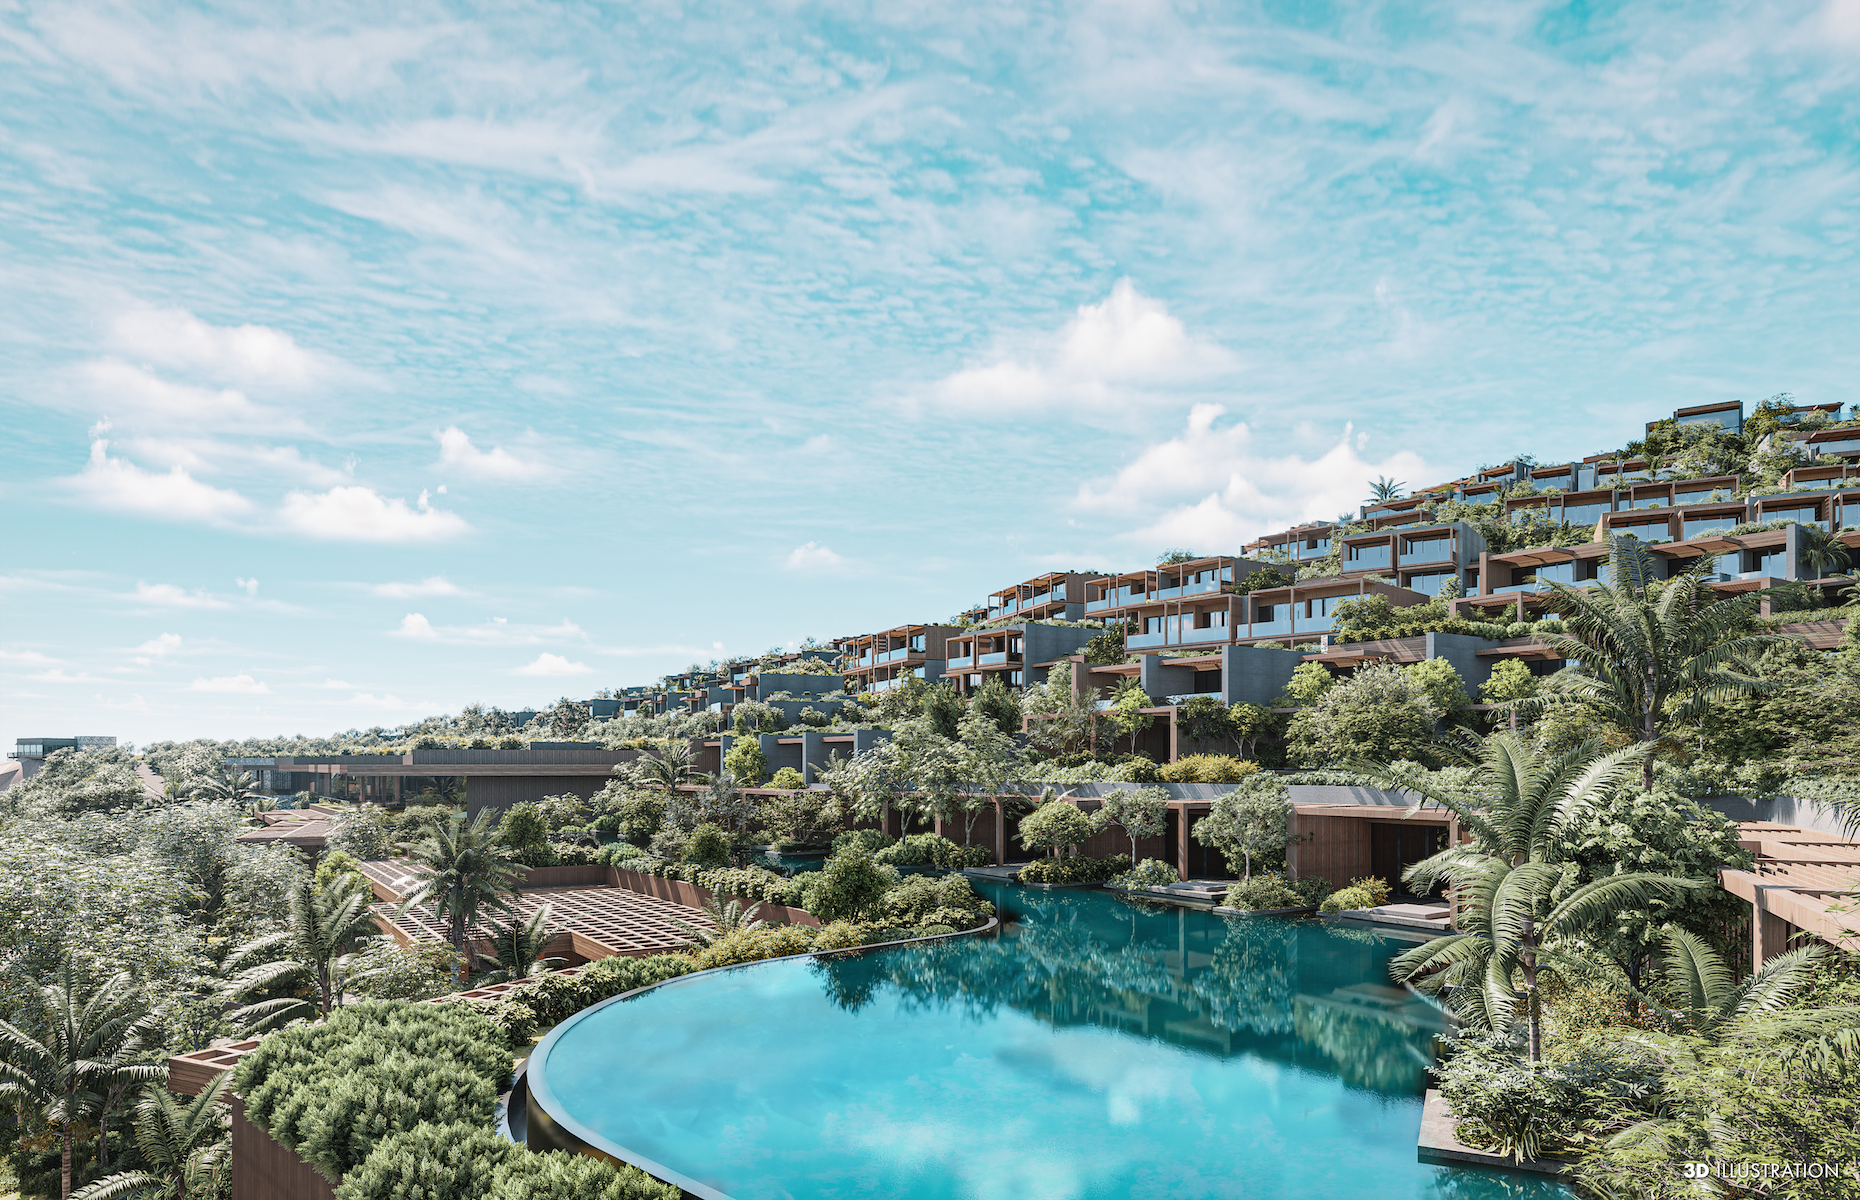 <p>Sitting pretty on a private, pine-fragrant peninsula on the bay of Golturkbuku, this 294-room hotel from Turkey’s Maxx Royal Resorts brand is set to become Bodrum’s hottest new hangout when it opens in summer 2024. Suites and villas of varying sizes will pepper large, landscaped grounds, as will no less than six pools – outdoor, indoor, seawater and heated – and a whopping spa. There will be a beach club, seven restaurants (including an outpost of Caviar Kaspia), 14 bars, a kids’ club and teen zone too. </p>